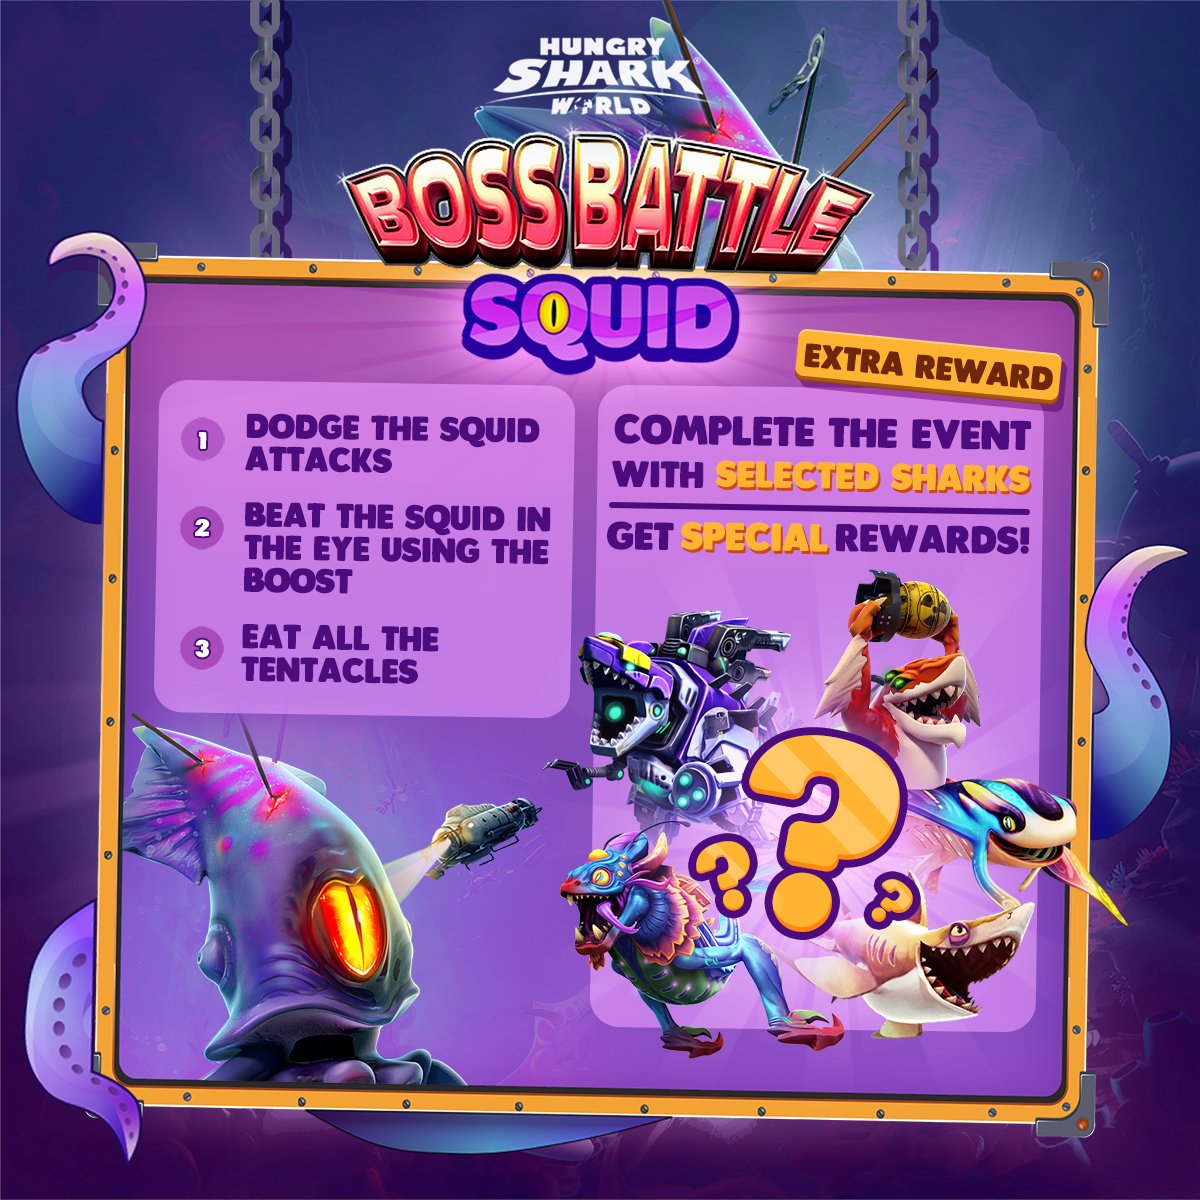 The battle of the COLOSSAL SQUID BOSS 🦑can be tricky and thus, we bring a guide of tips for this liquid event💥 1: Dodge all incoming attacks🕺 2: Use the boost to launch into its eye👁️ 3: Chomp down on its tentacles💪 #HSW #HungrySharkWorld #ColossalSquidBoss #BossBattle